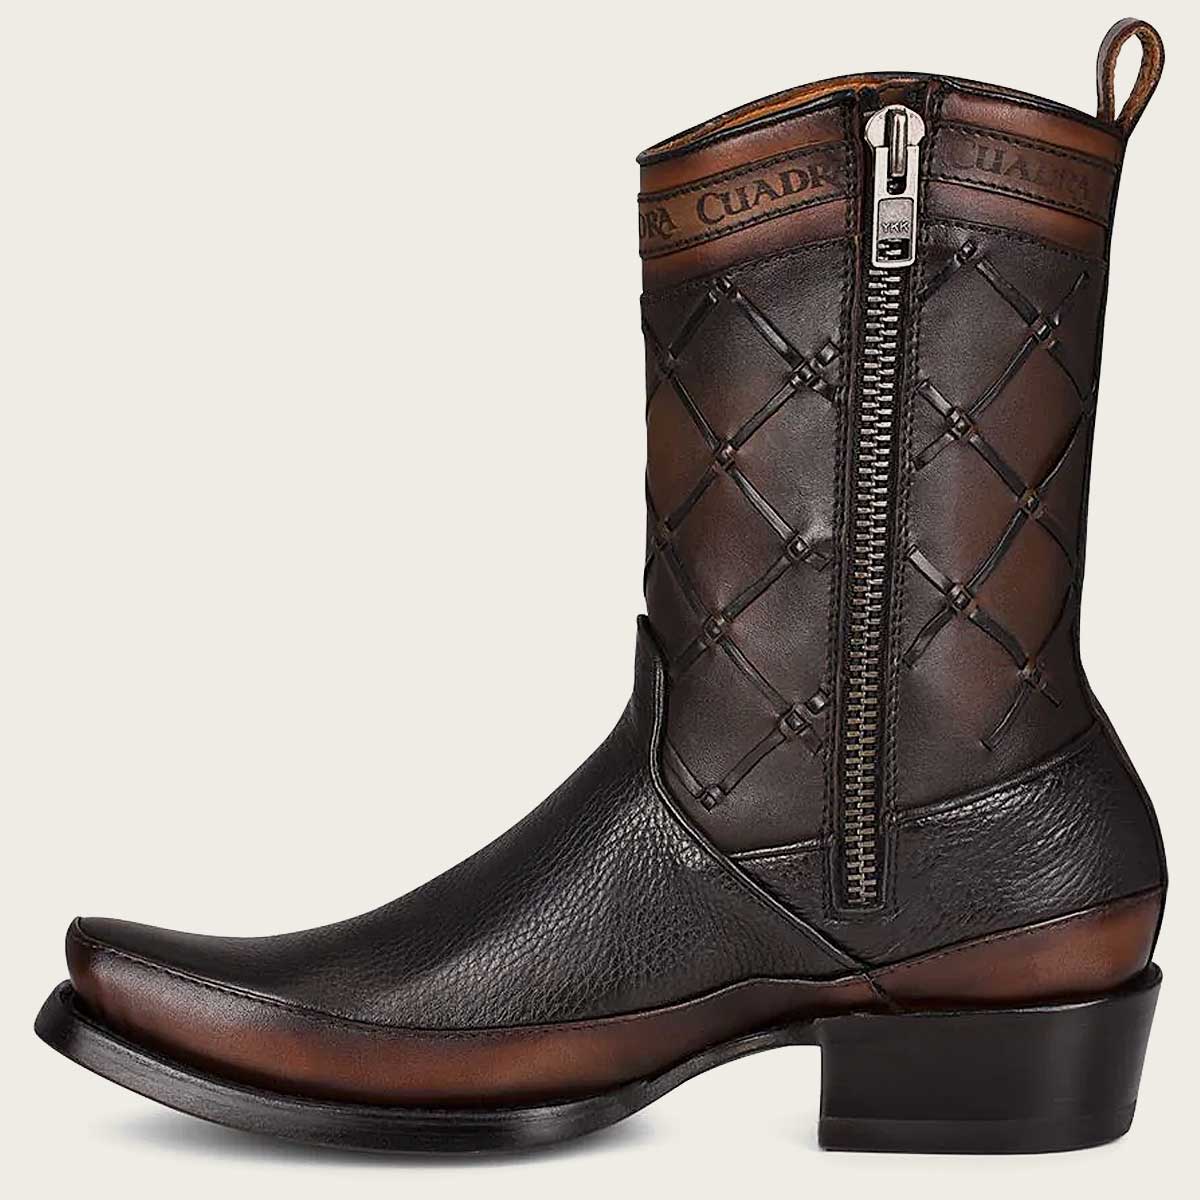 High-quality men's leather boots with handmade fabric, geometric motifs, and Cuadra logo in bovine leather